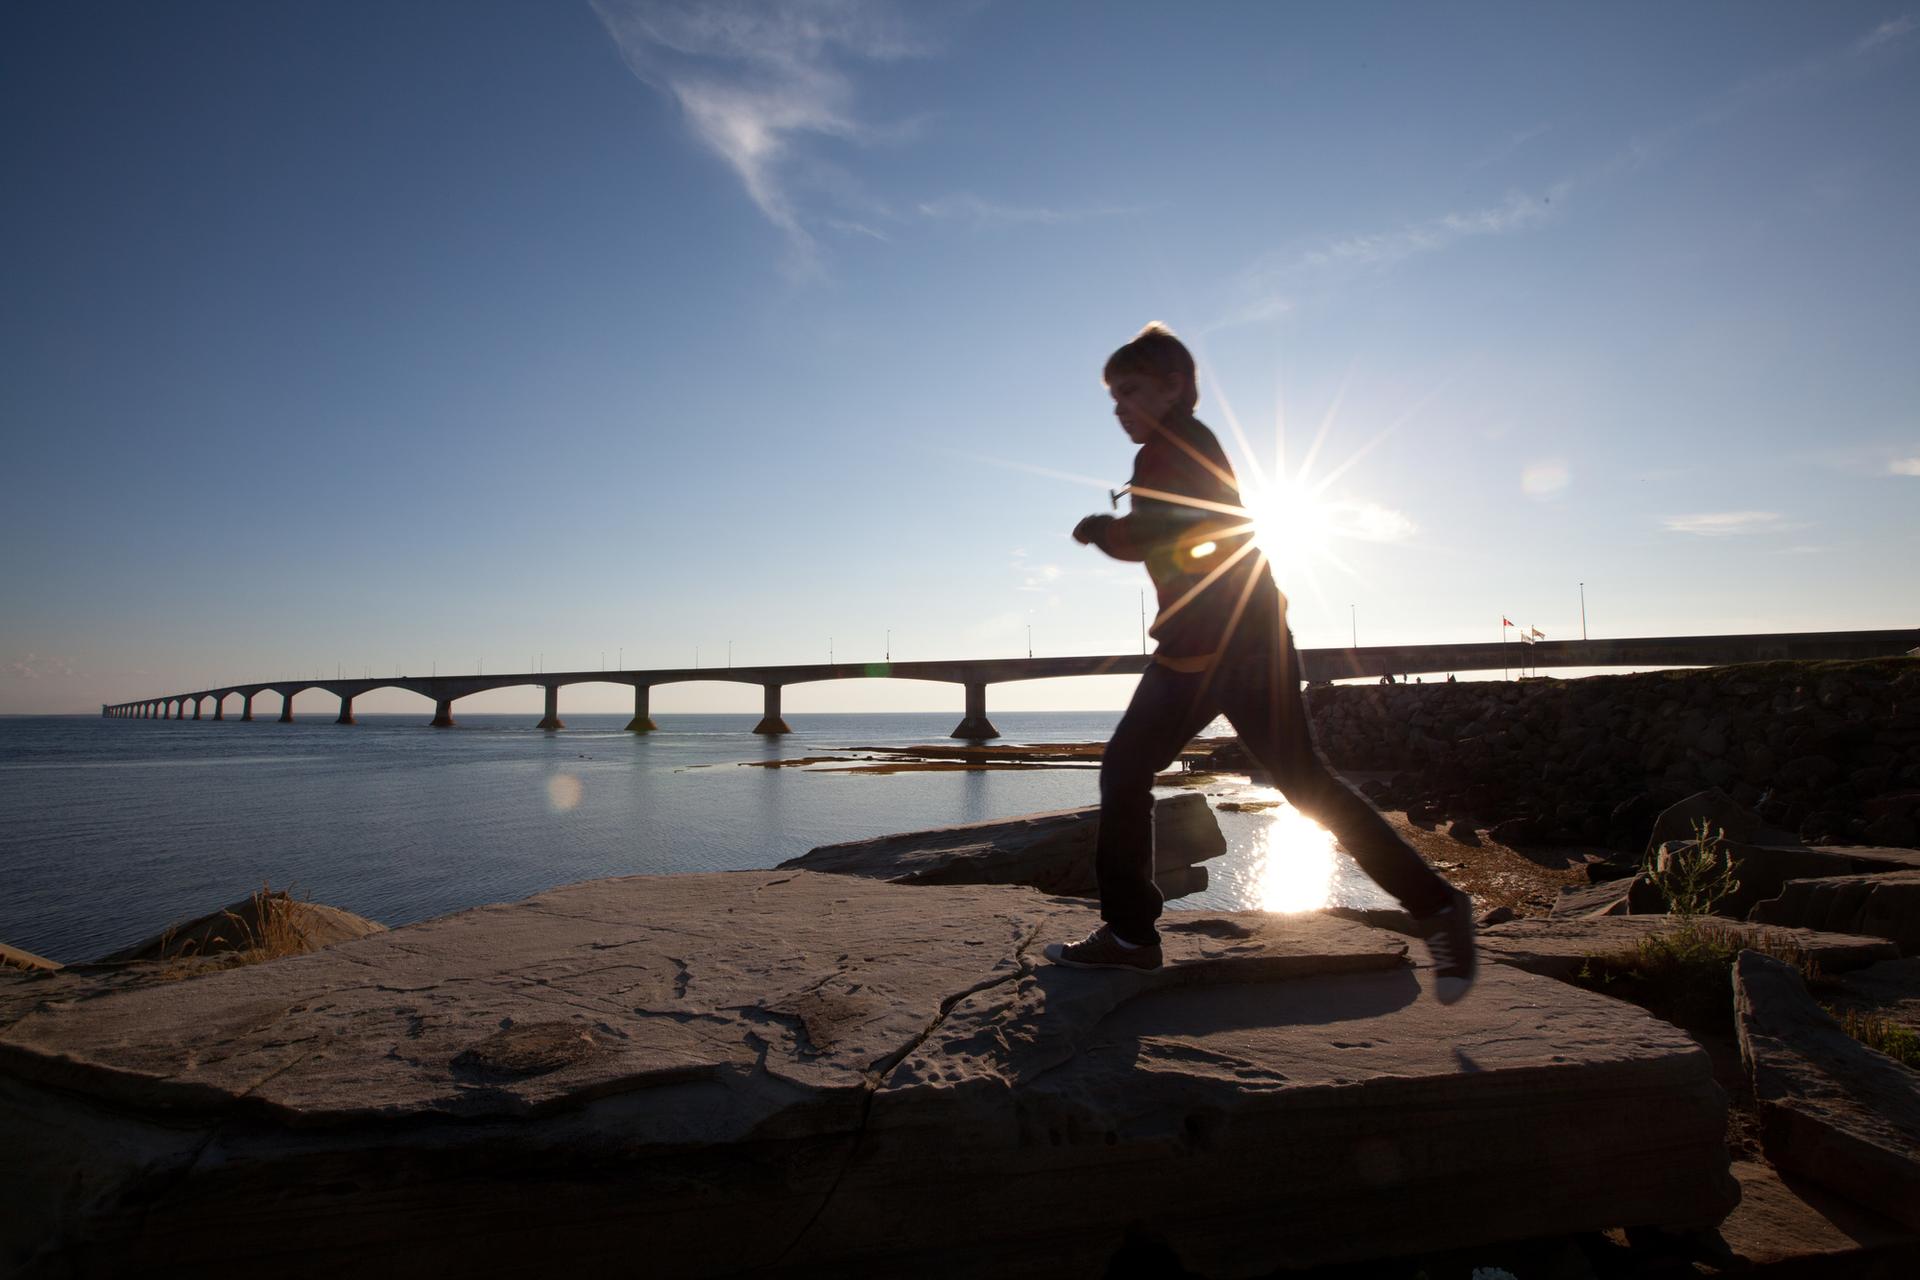 A young kid runs on the rocks under the Confederation Bridge in Prince Edward Island